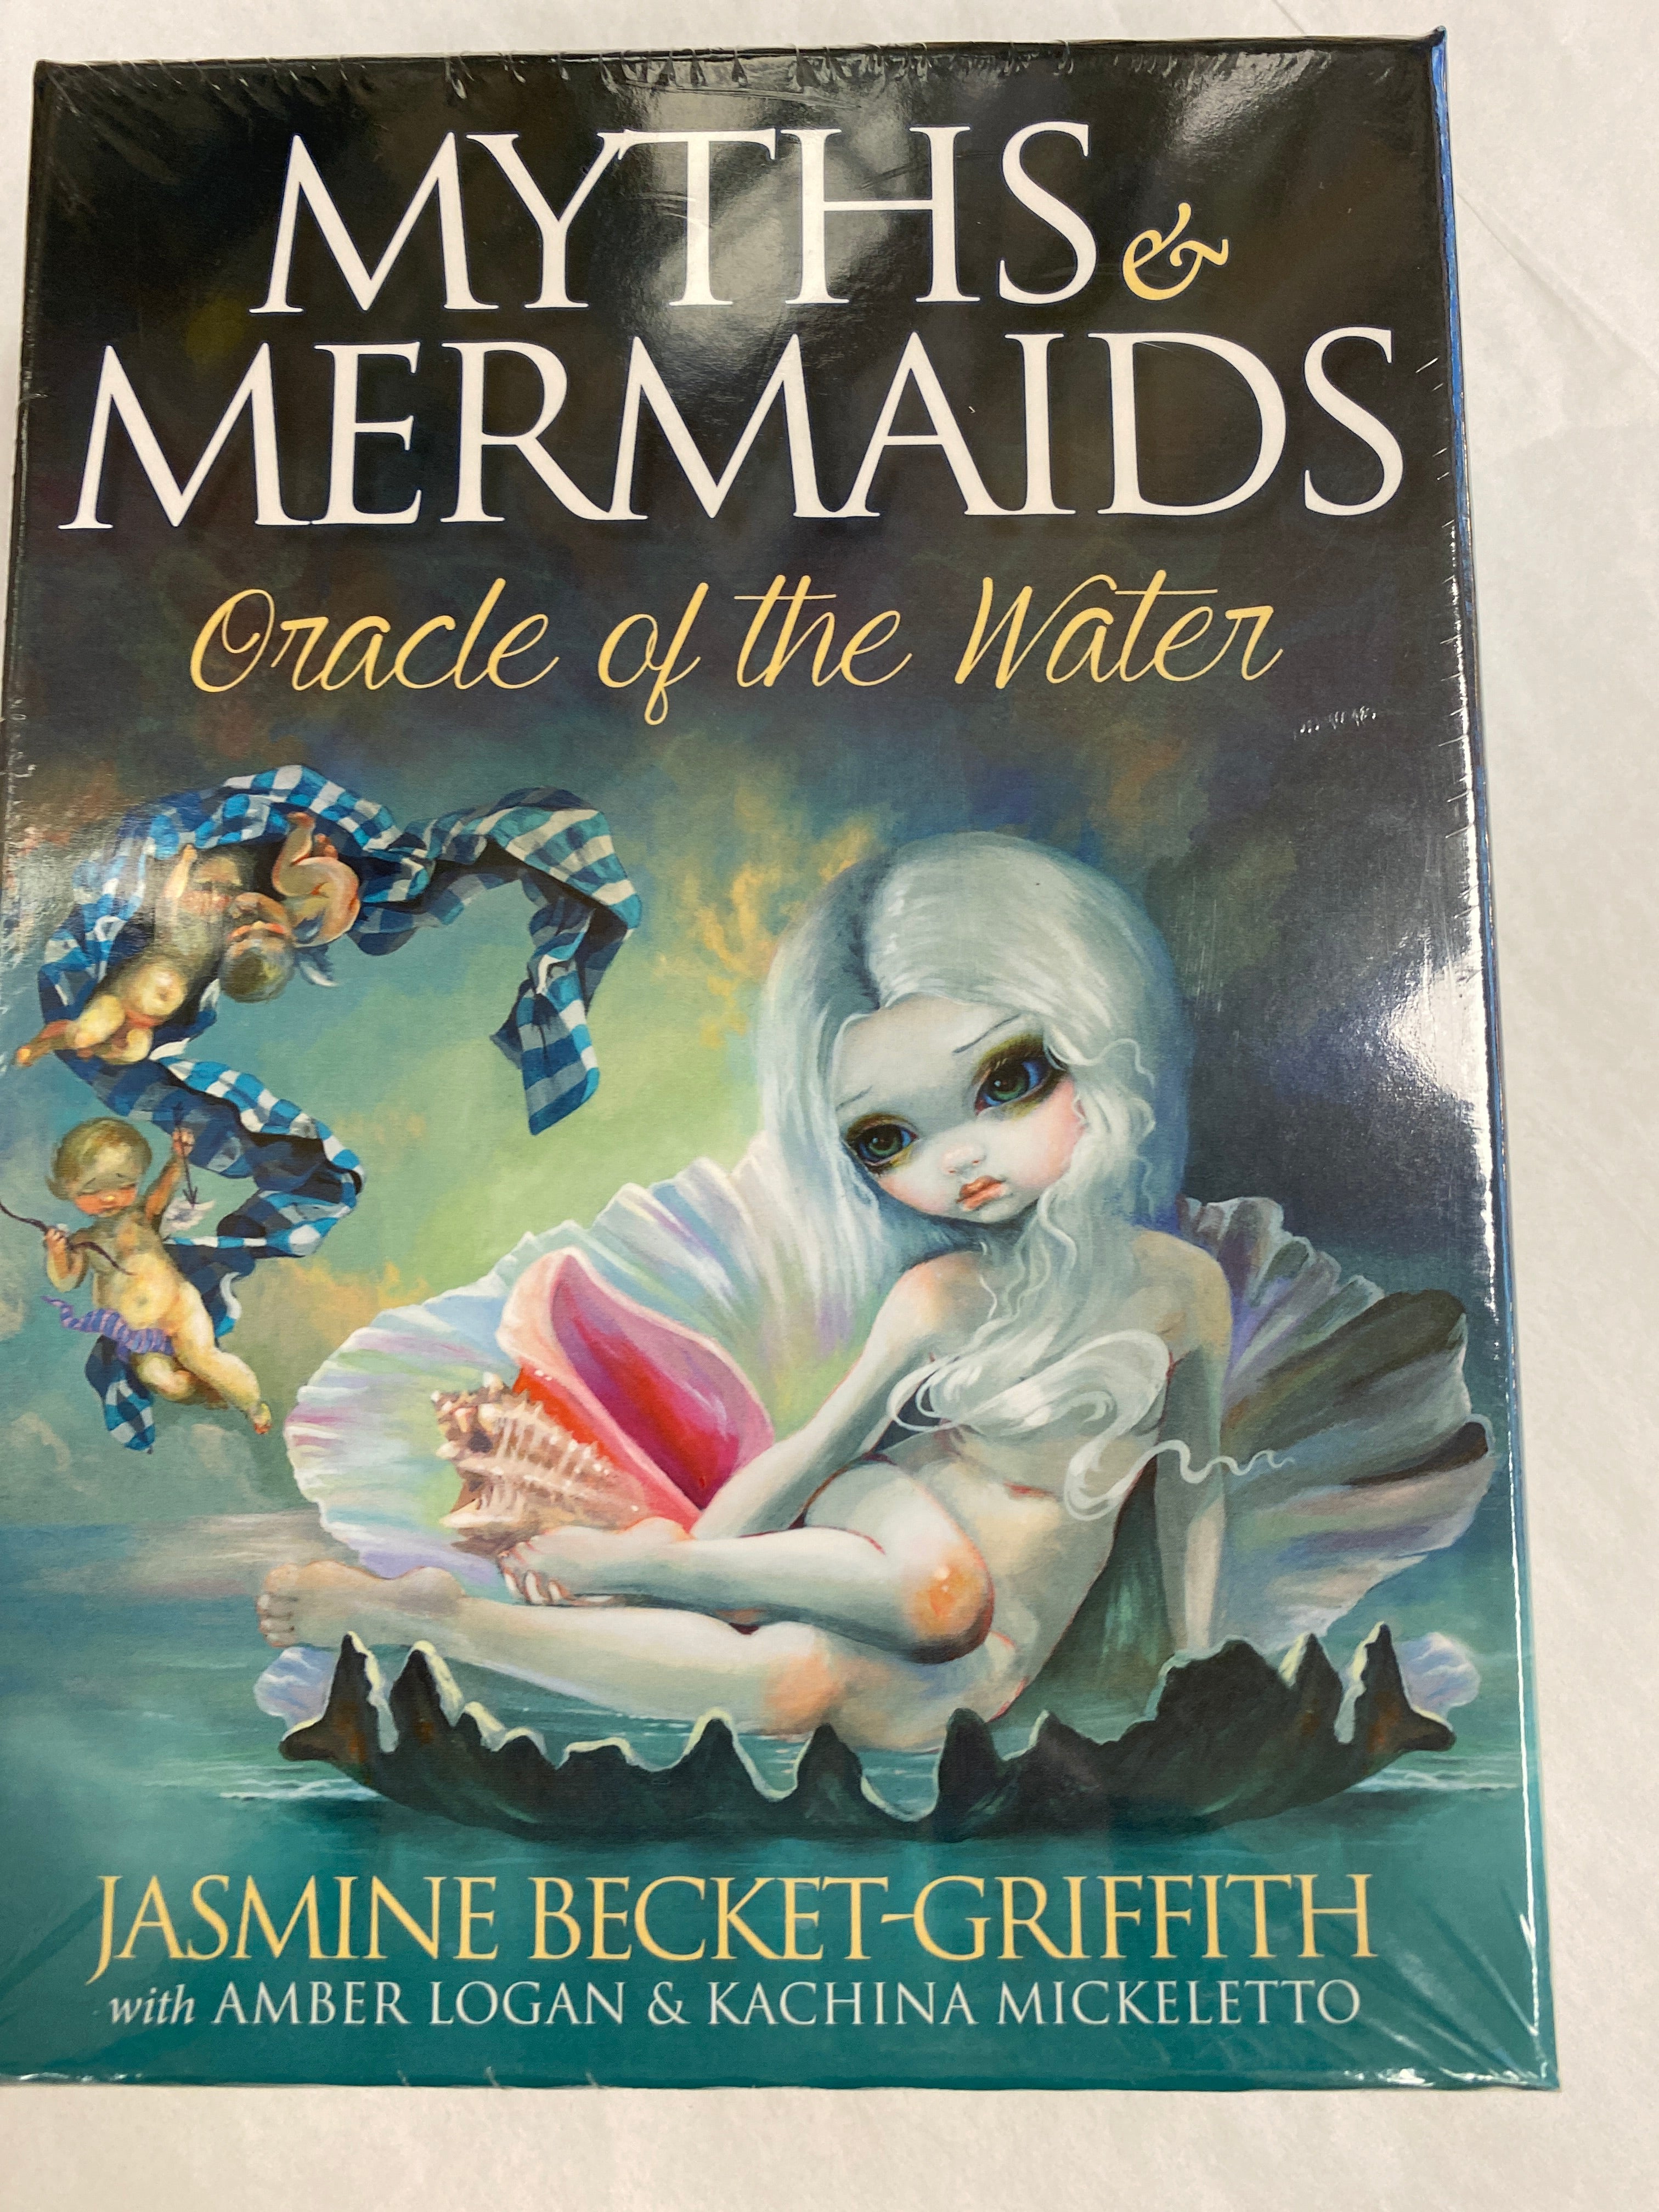 Myths and Mermaids Oracle